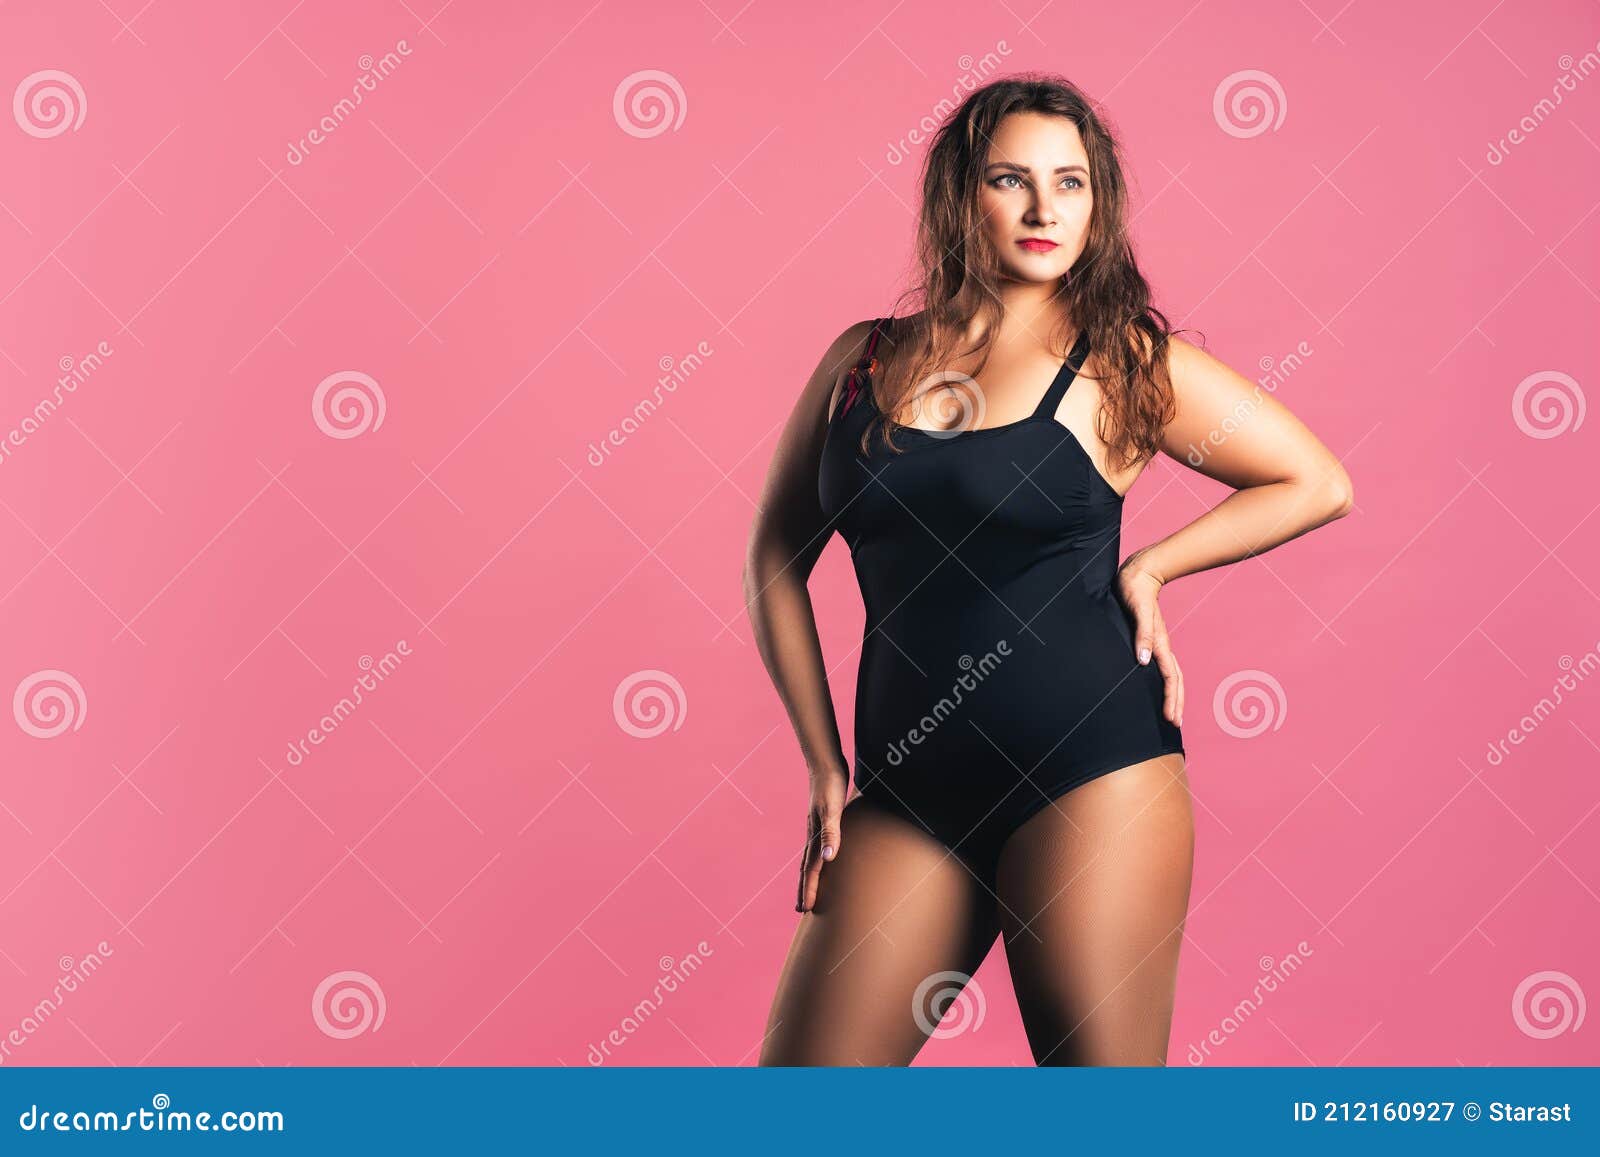 Plus Size Fashion Model in Black One-piece Swimsuit, Fat Woman in Lingerie  on Pink Background Stock Image - Image of oversized, body: 212160927